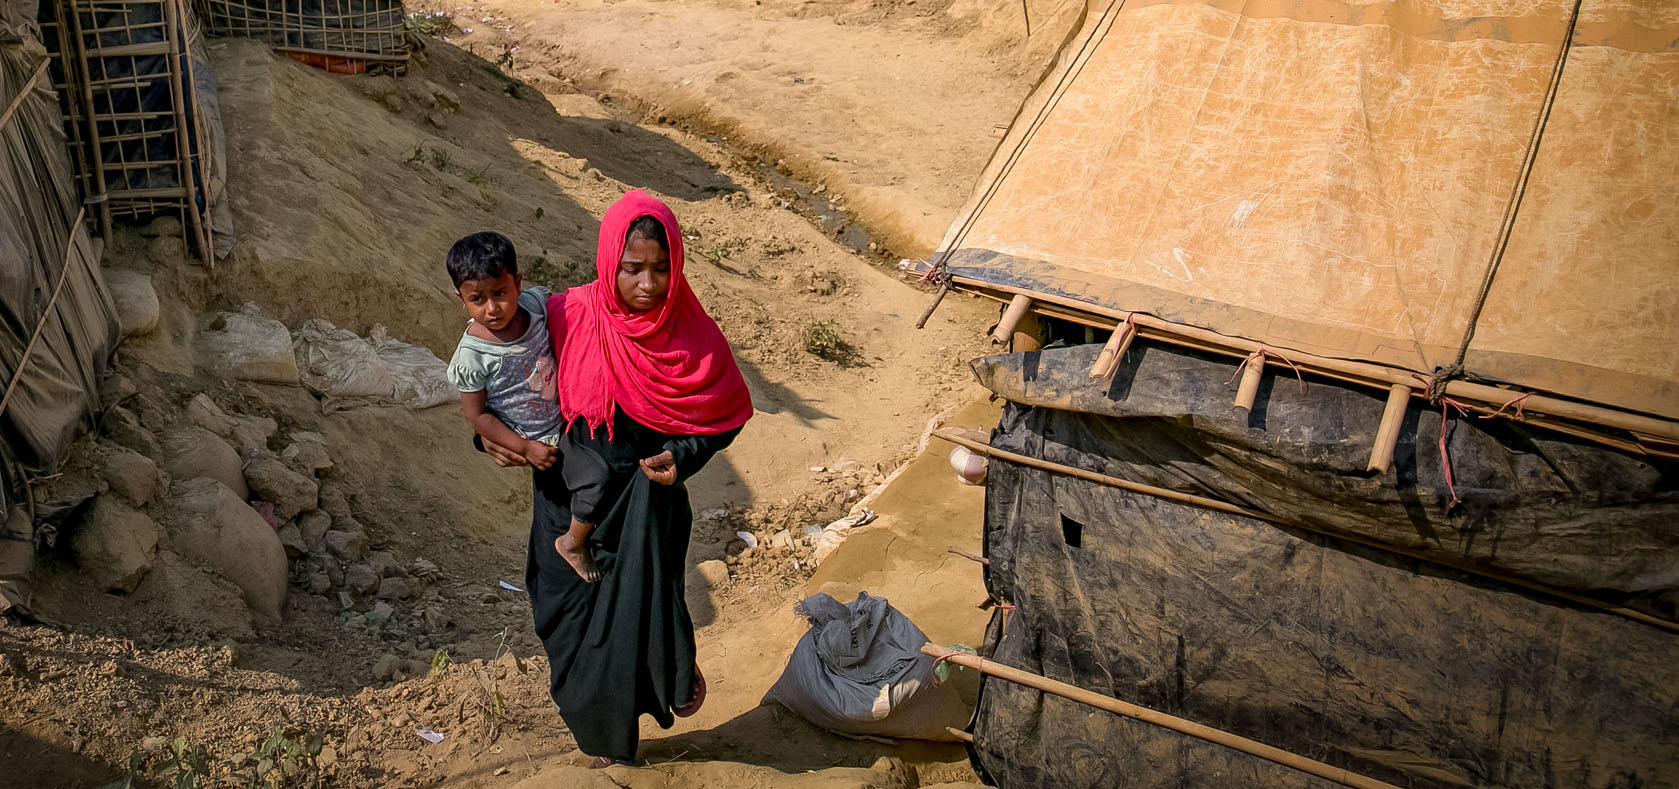 Lack of trust and confidence in police discourage women and girls from reporting violence to the police. Photo taken on 5 March 2018 in the Balukhali refugee camp in Cox’s Bazar. Photo: UN Women/Allison Joyce